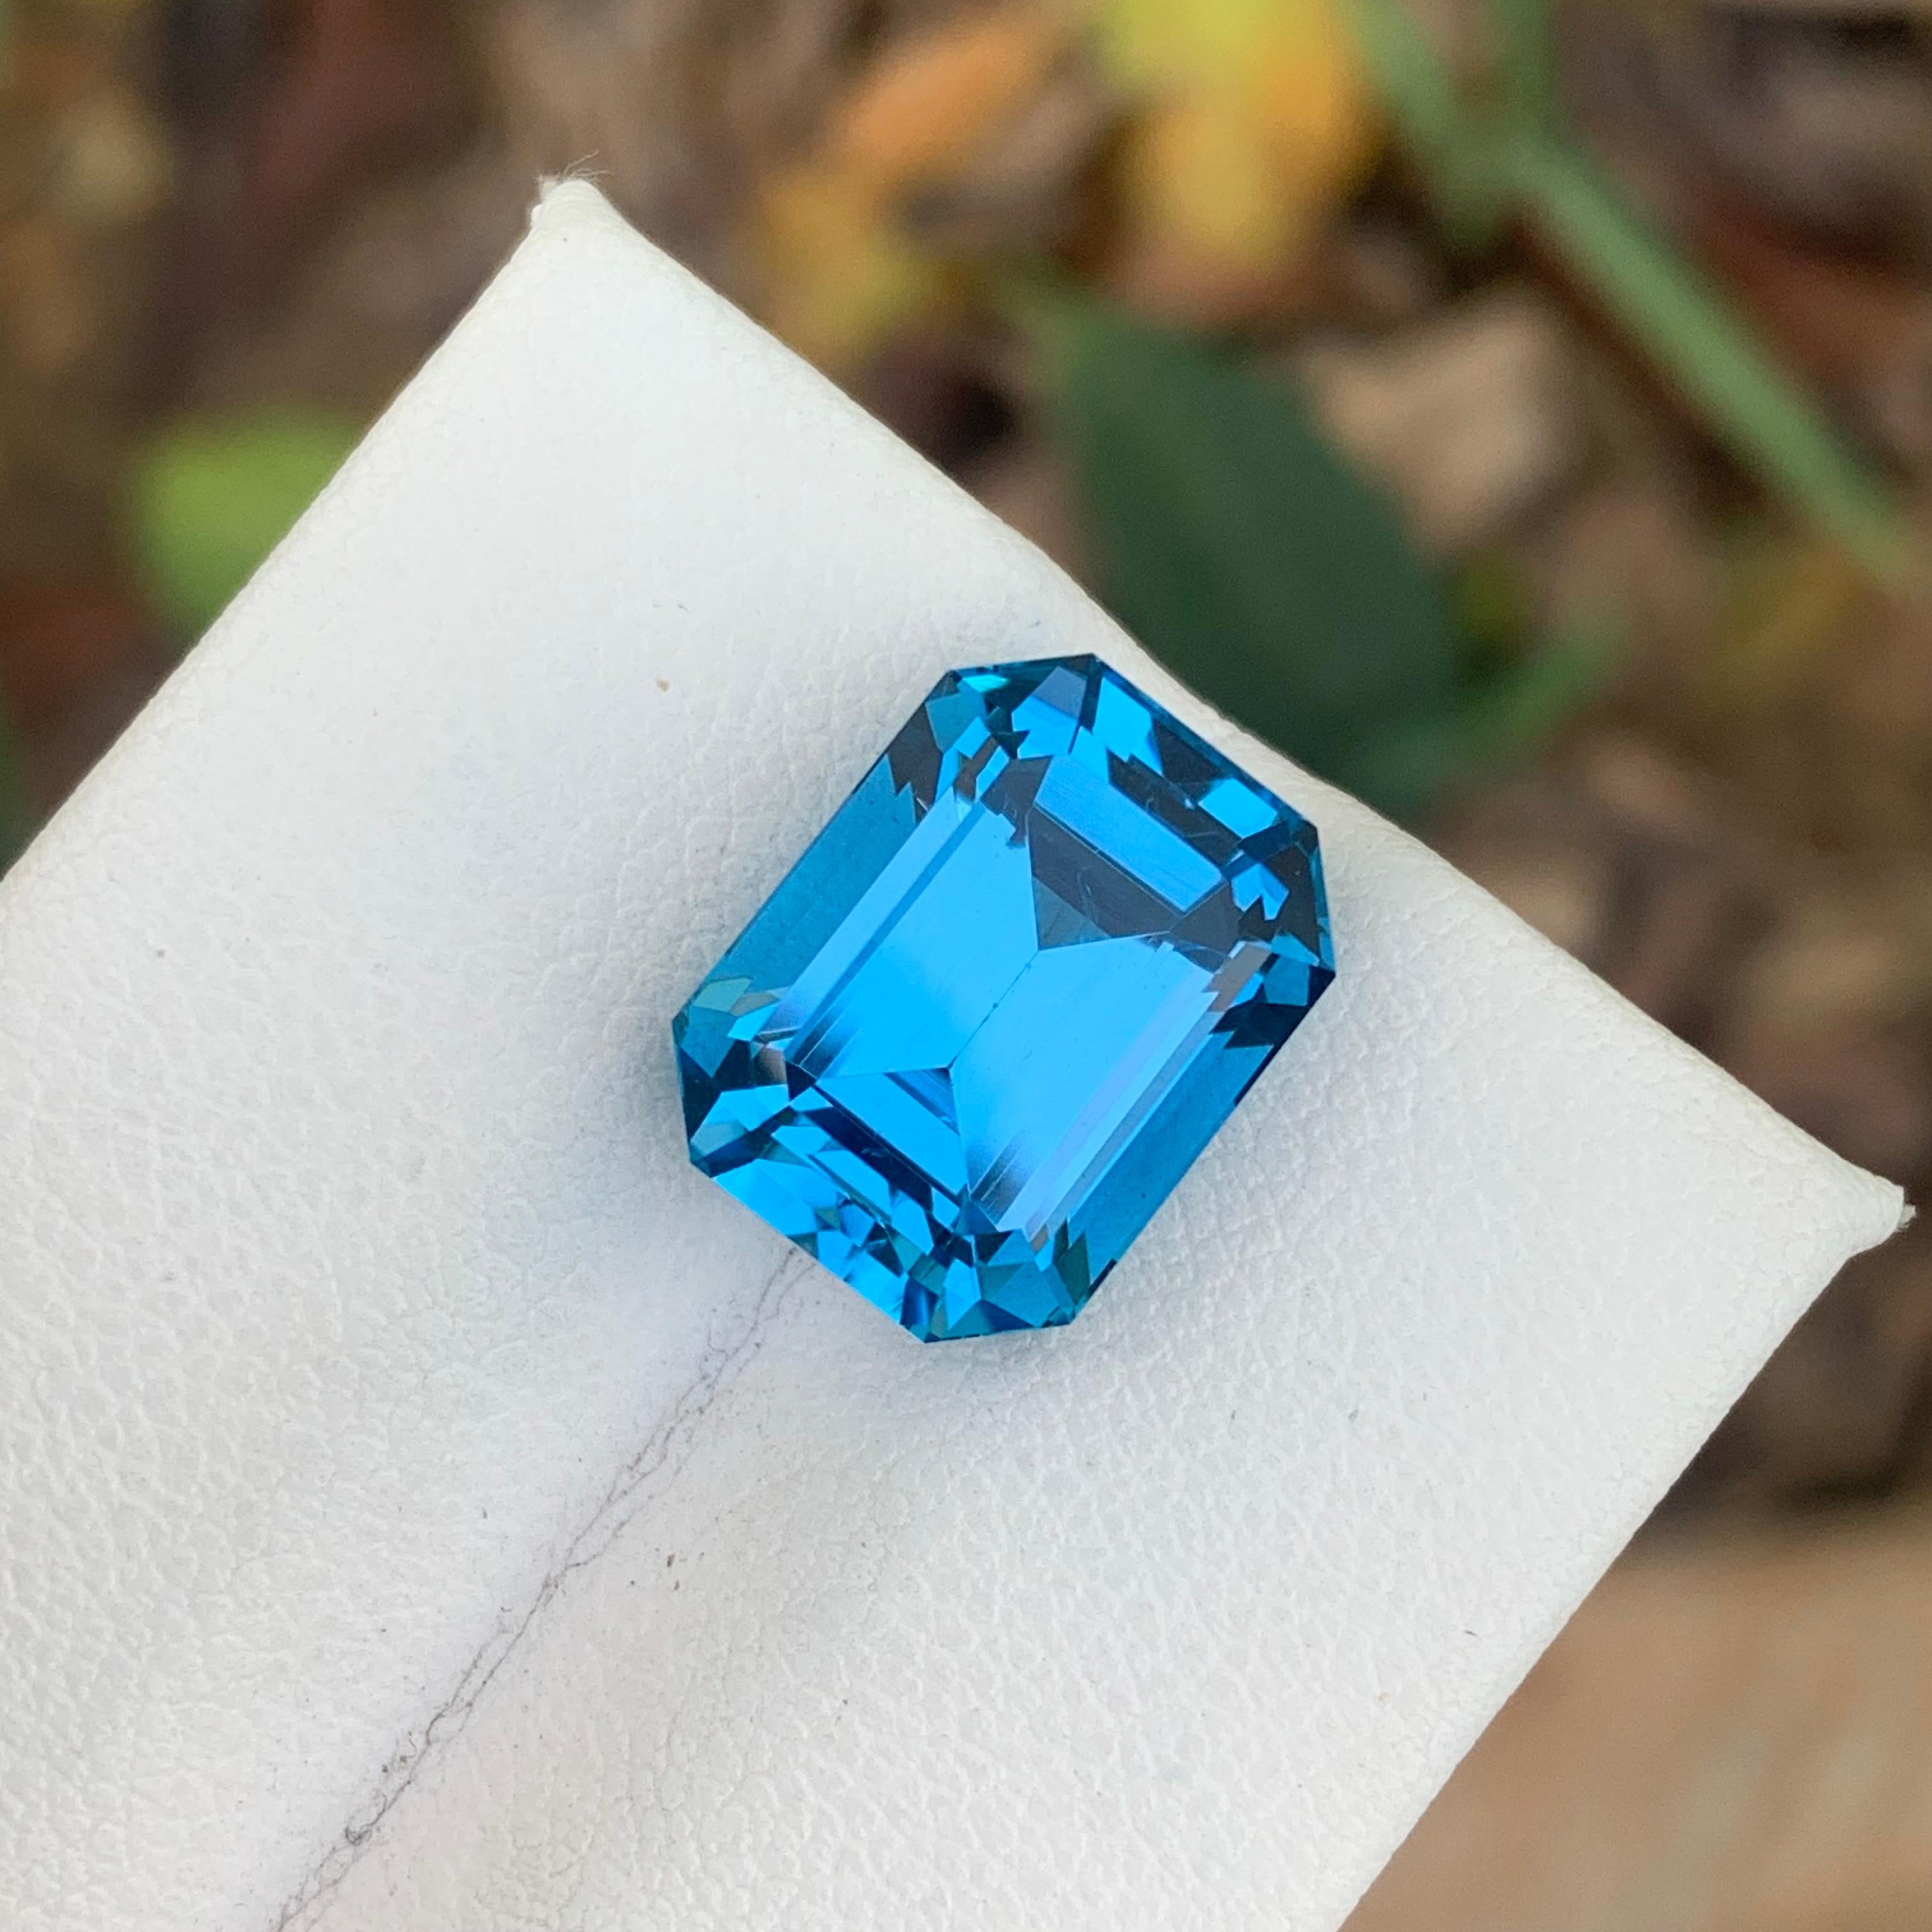 Emerald Cut Gorgeous Intense Blue Loose Electric Blue Topaz from Brazil 9.85 Carat Ring Gem For Sale